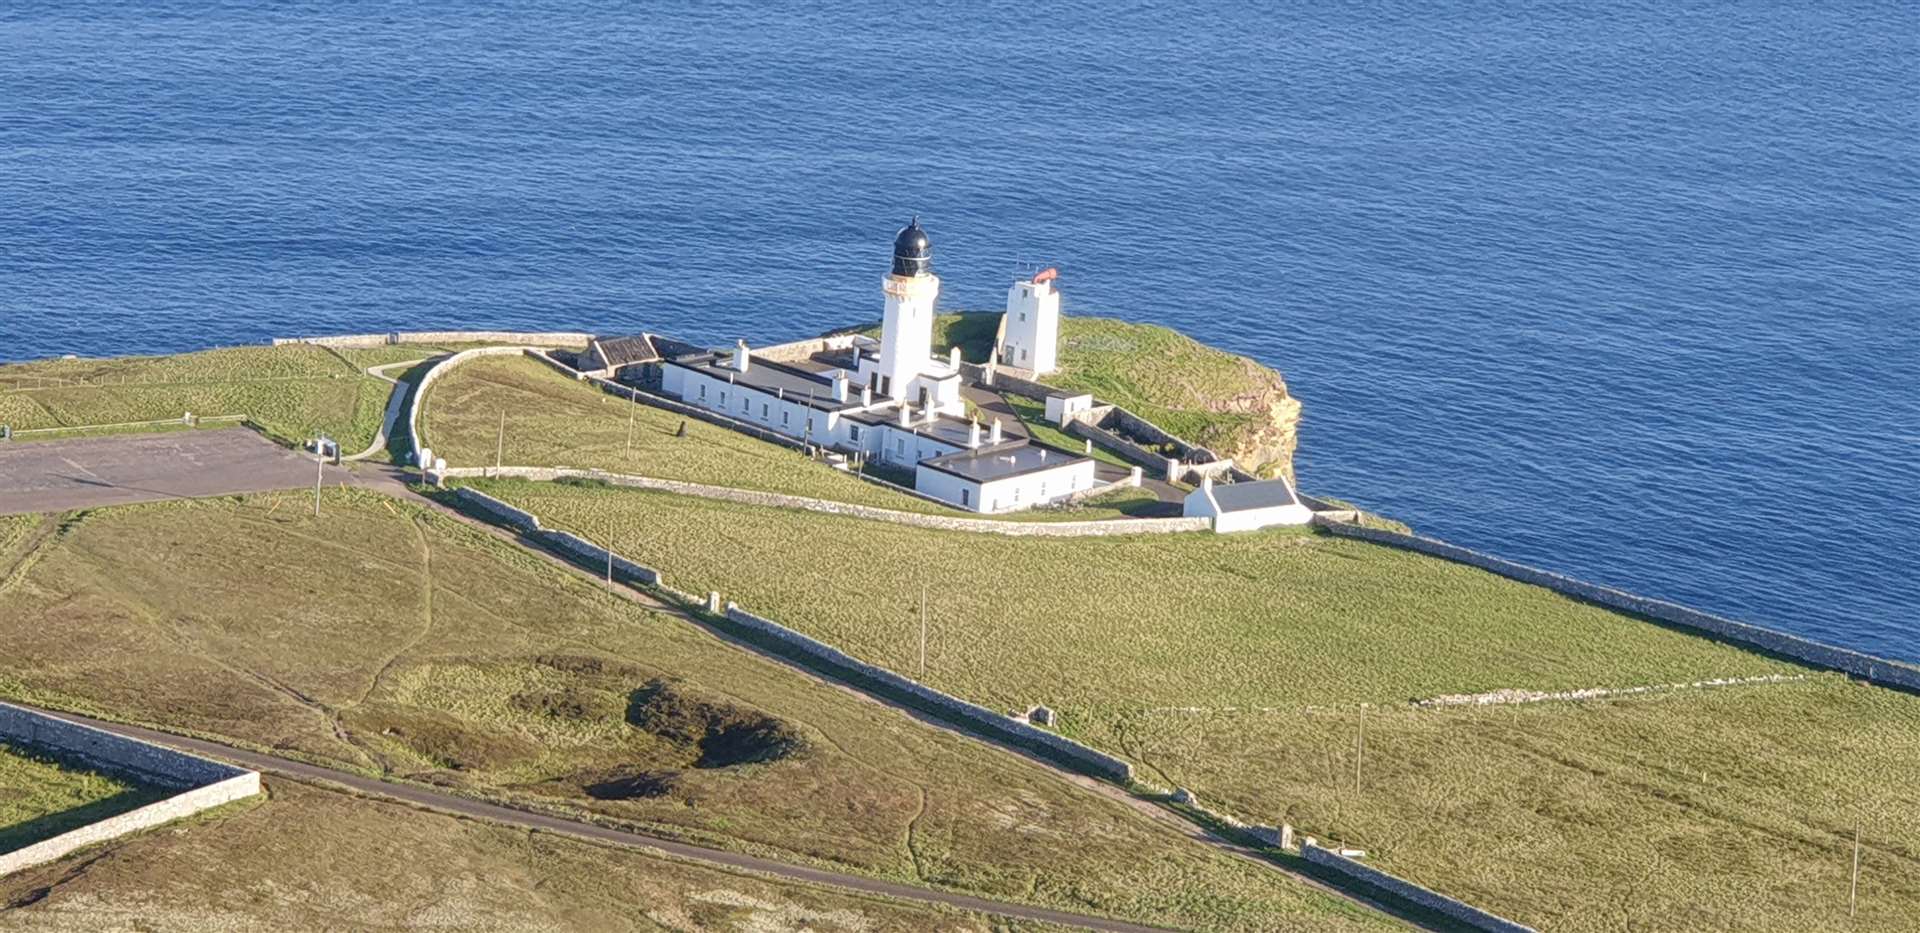 Dunnet Head is the northernmost point in mainland Scotland.